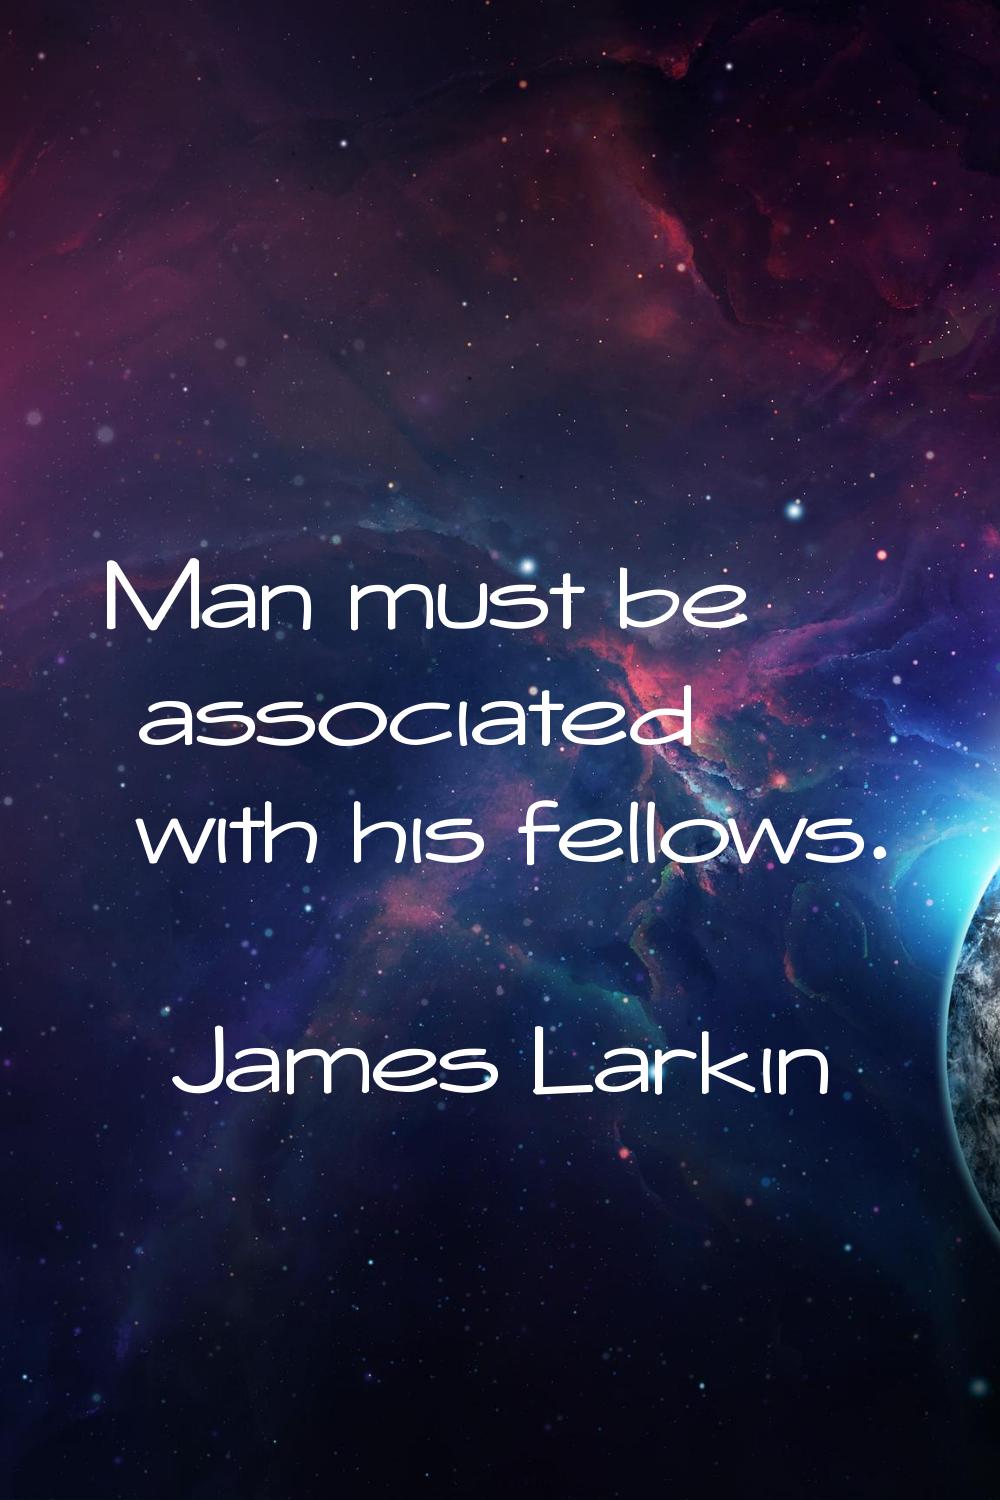 Man must be associated with his fellows.